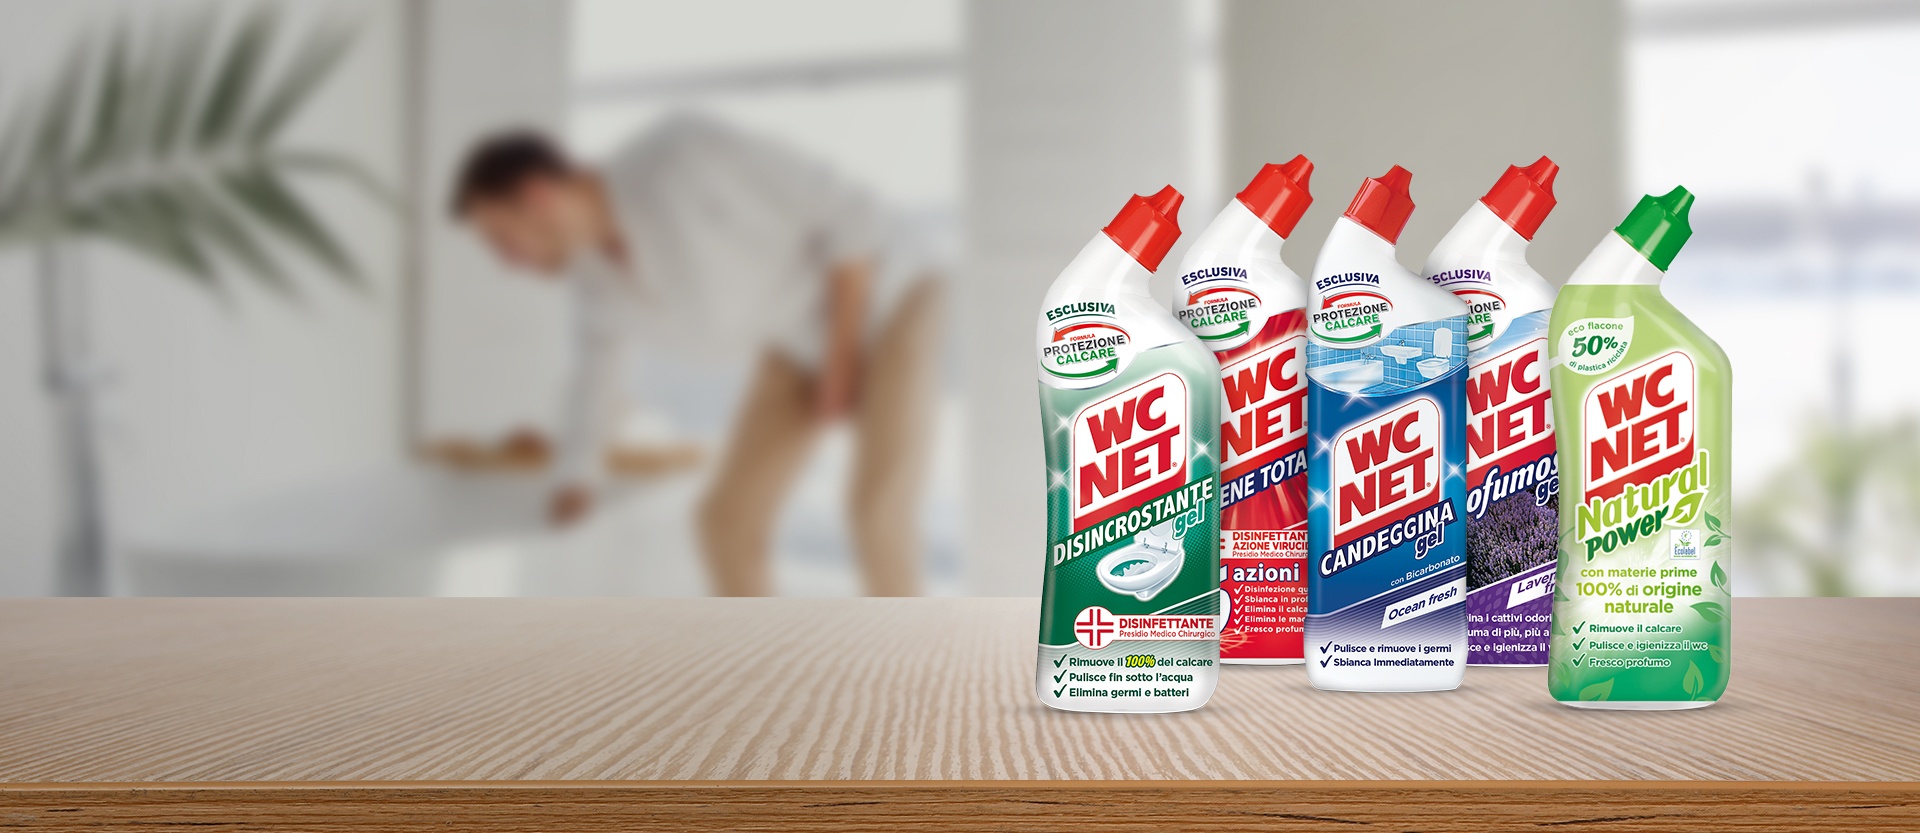 In-depth cleaning and <span>complete hygiene</span>